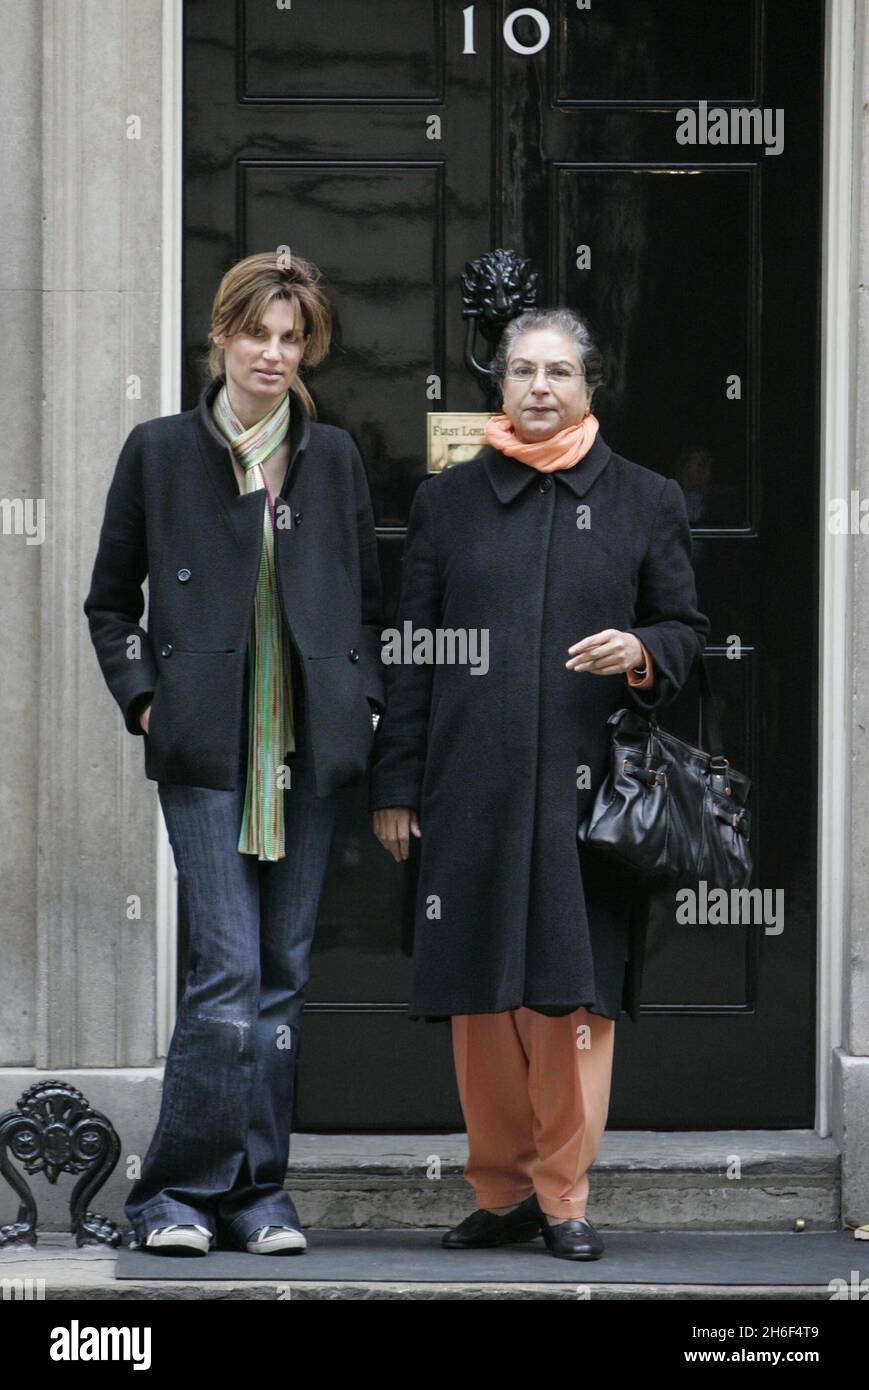 A protest for democracy in Pakistan was held in central London. The demonstration organised by Campaign Against Martial Law was lead by Jemima Khan and her family. Picture shows: Jemima Khan and Hina Jilani (General Secretary Of Human Rights) in Downing Street.  Stock Photo